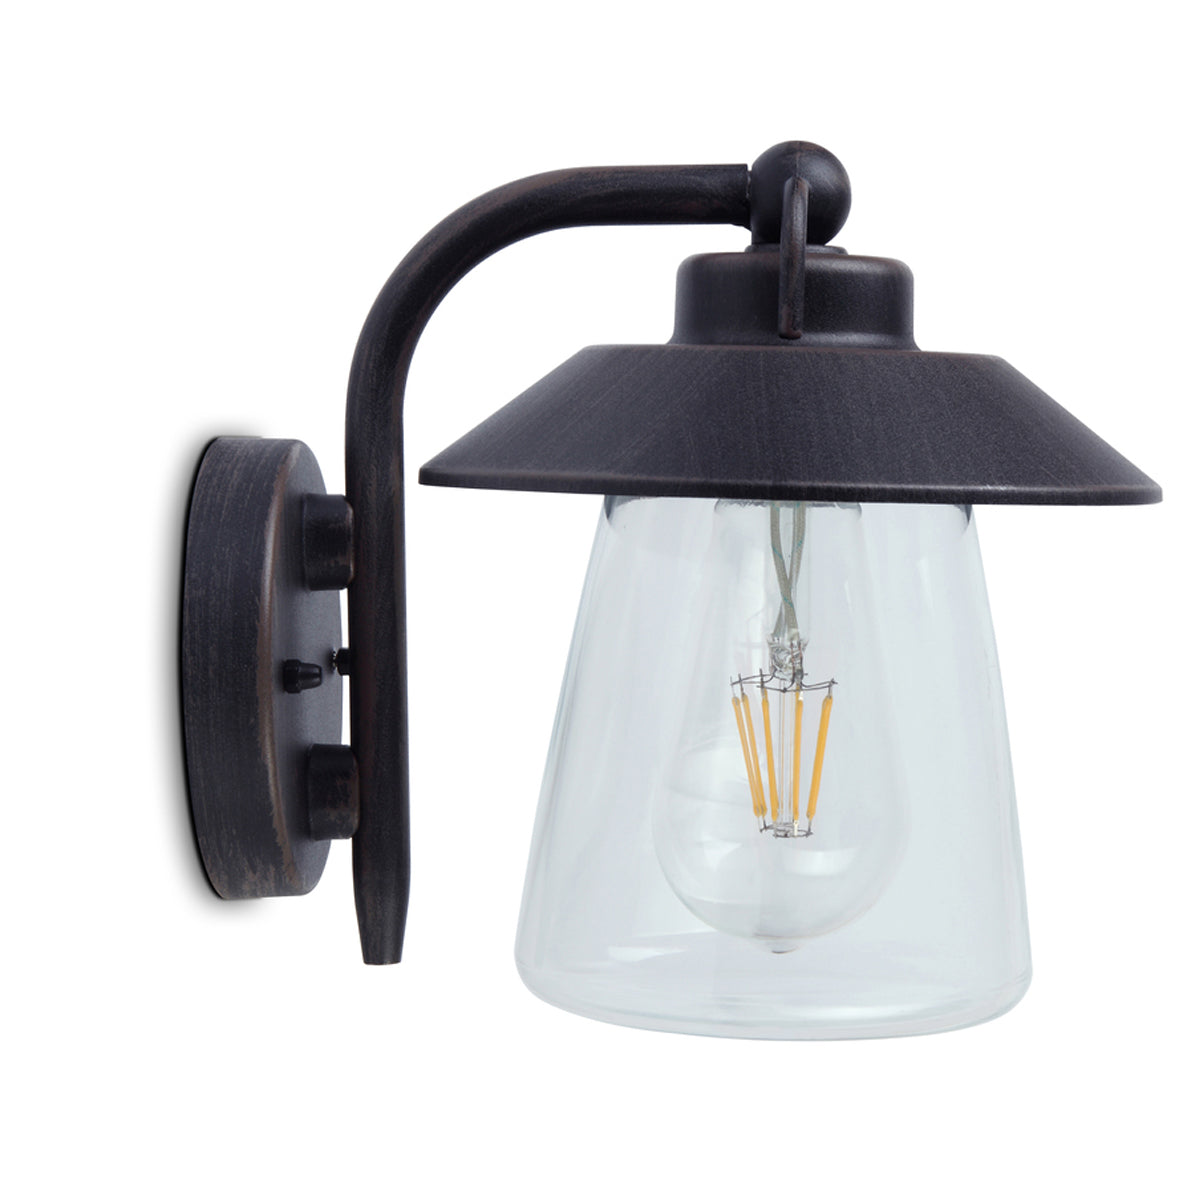 Black matt with washed bronze finish Applicable to walls Vintage styled light with metal framing and weathered looks. E27 bulb (not included), 60W max IP44 Rated for outdoor use, 220-240V mains power, ambient temperature -20 to +30, class 1 Height: 20 cm Width: 22.5 cm Shade Diameter: 17.6 cm